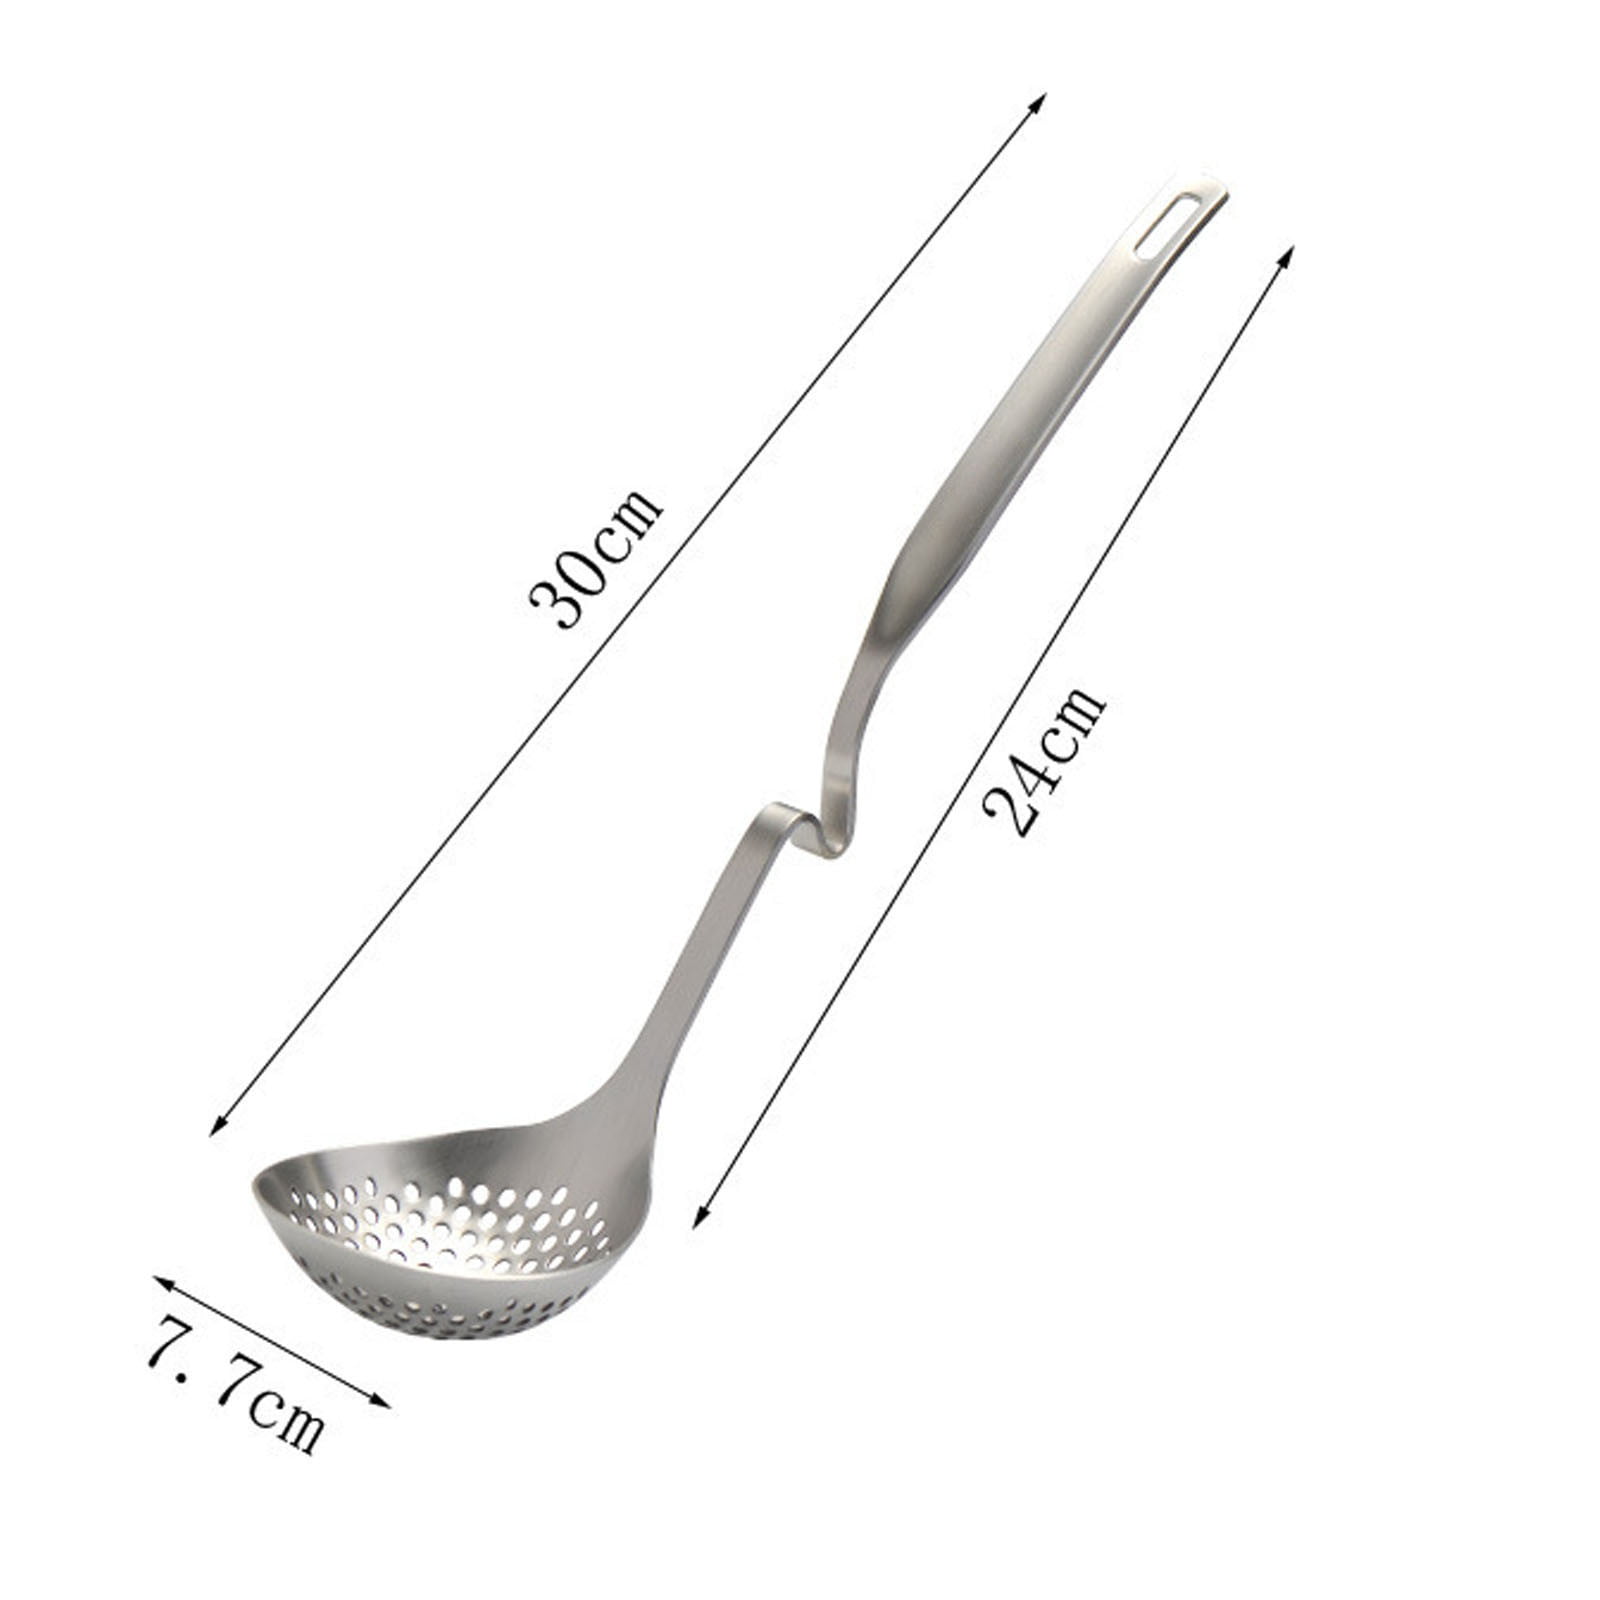 2 in 1 Soup Ladle Filter Creative Colander Long Handle Big Spoon Practical Kitchen Tool